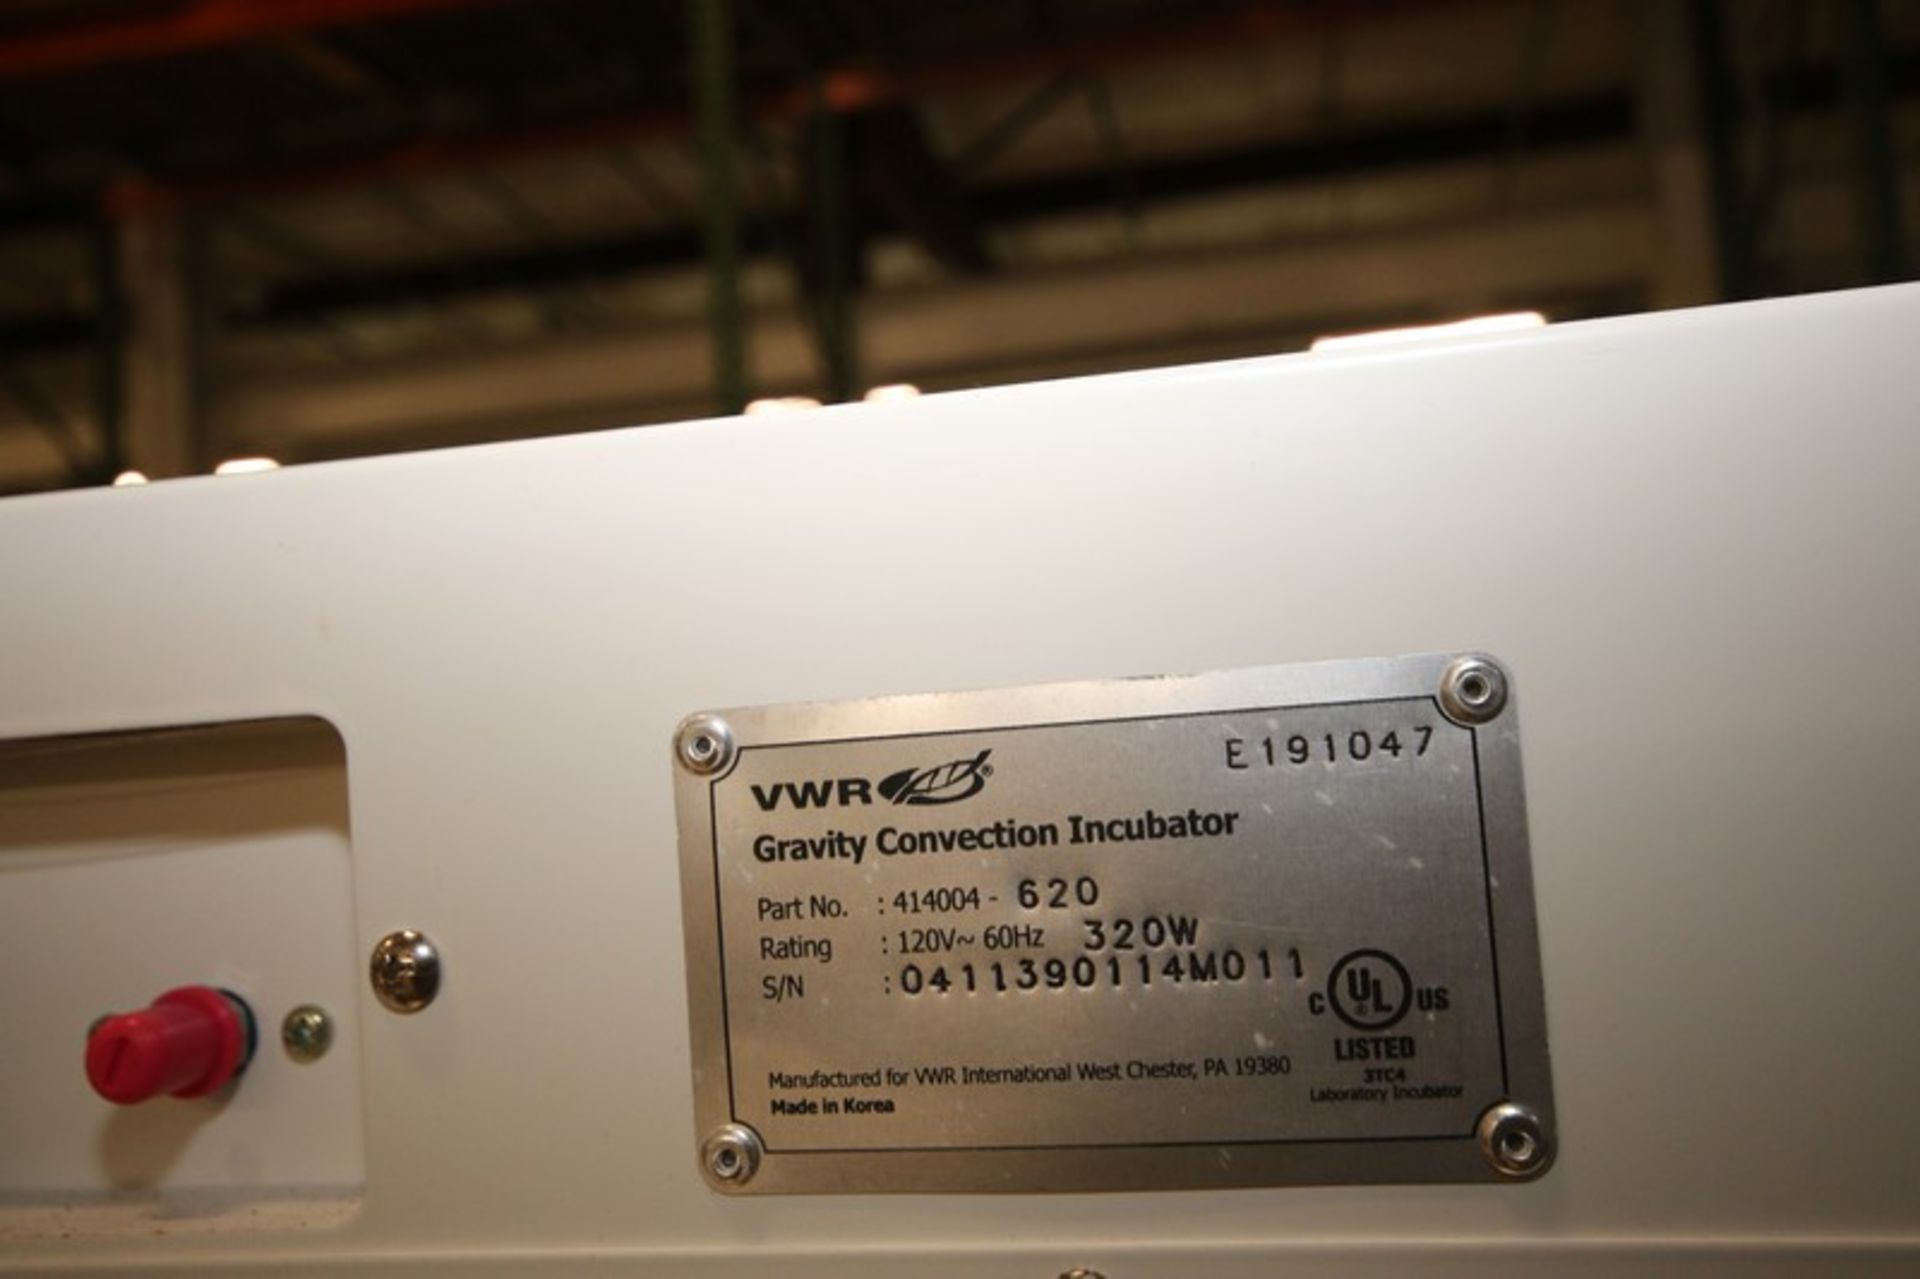 VRW Gravity Convection Incubator, Part No. 414004-620, S/N 0411390114M011, 120 Volts, with - Image 5 of 6